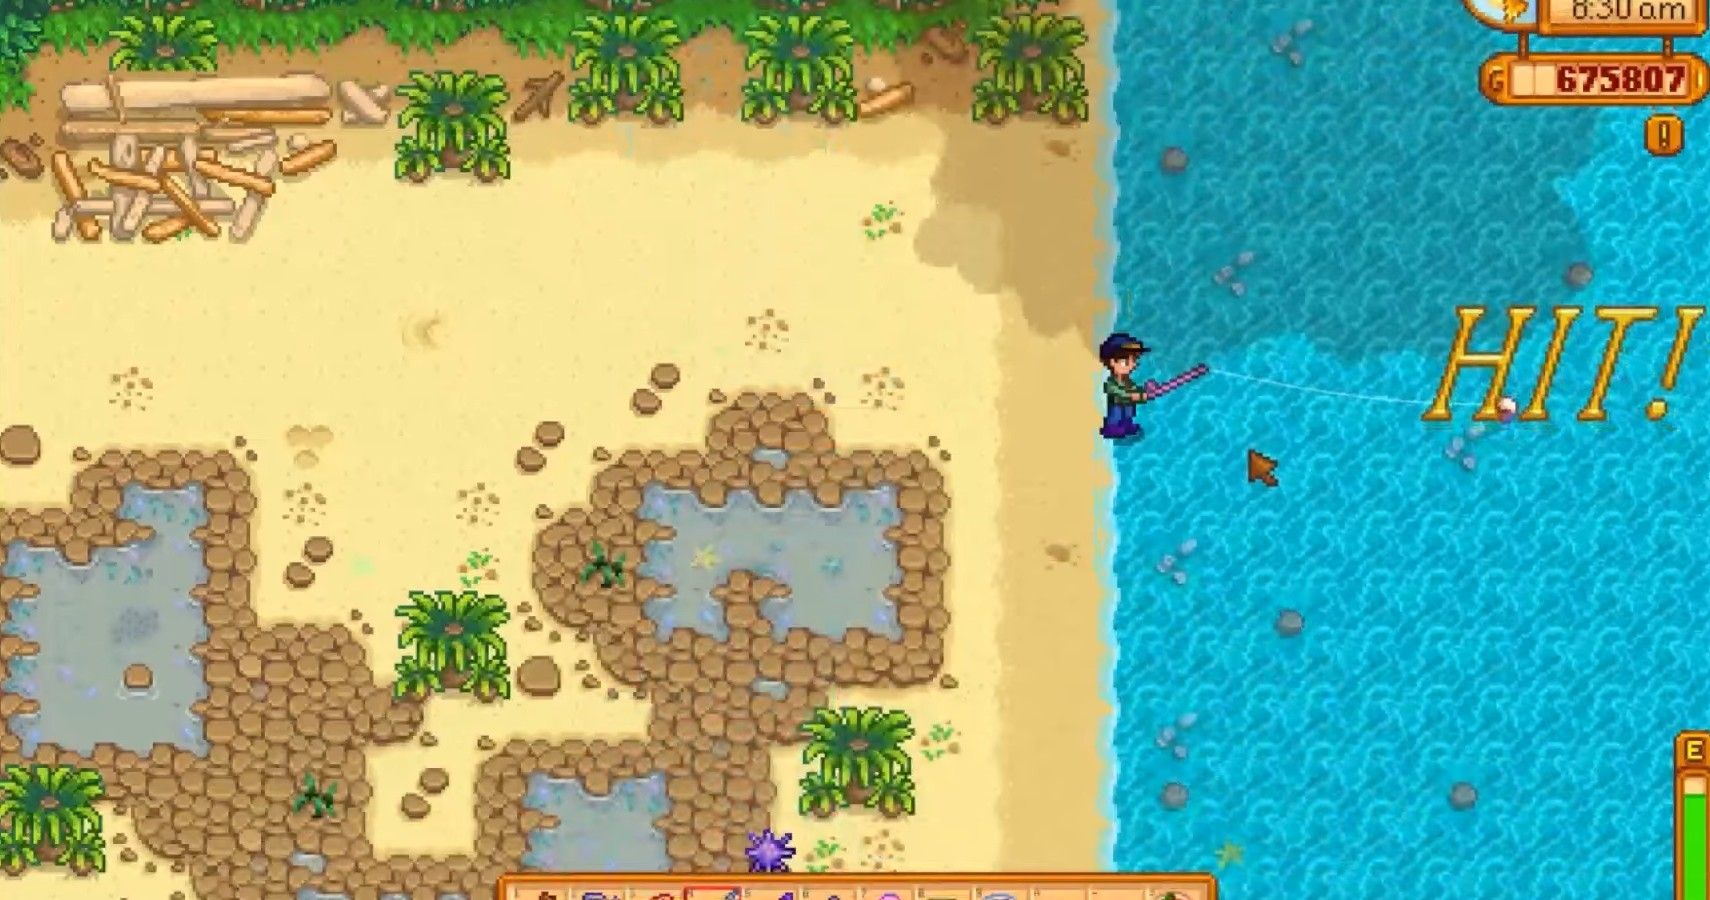 Stardew Valley Legendary Fish Guide - When And Where To Catch Them